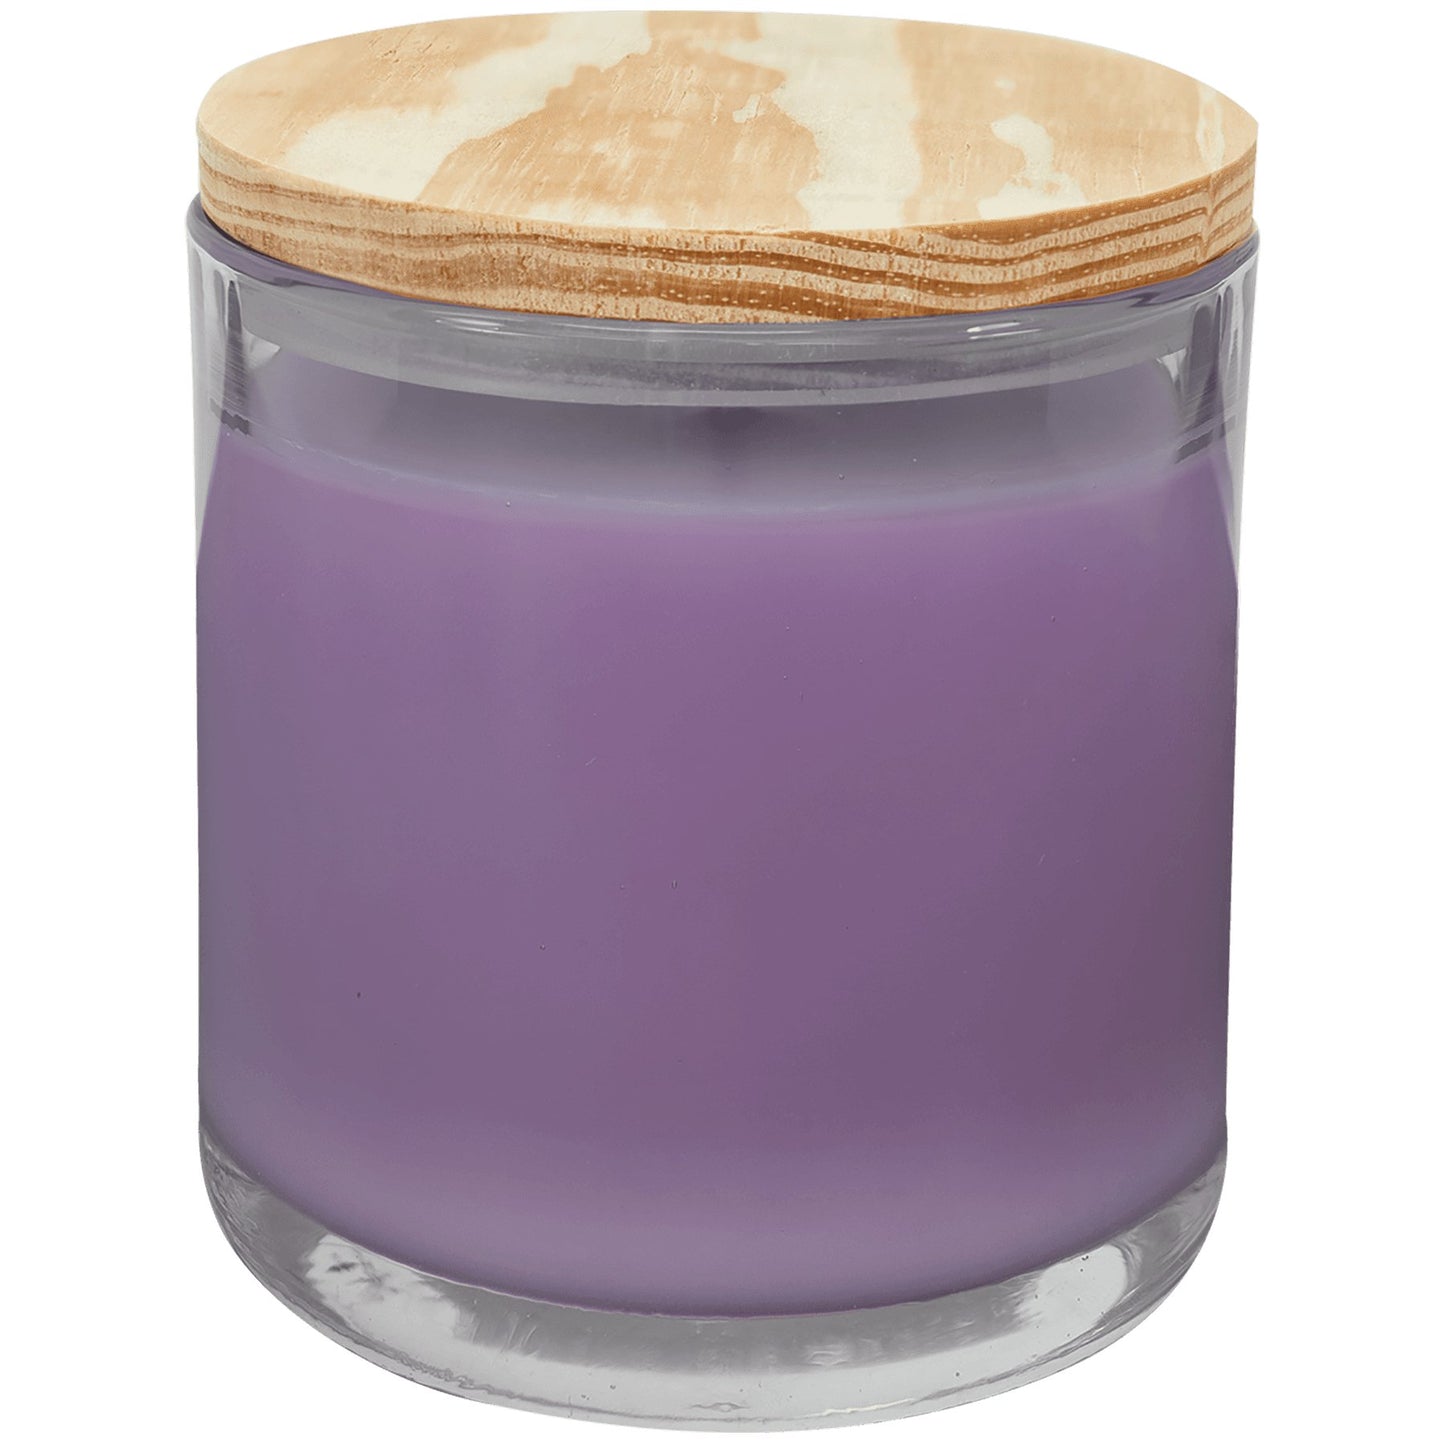 Customizable Scented Candle in a Glass Holder with Wood Lid - Legacy Creator IncLavender Vanilla